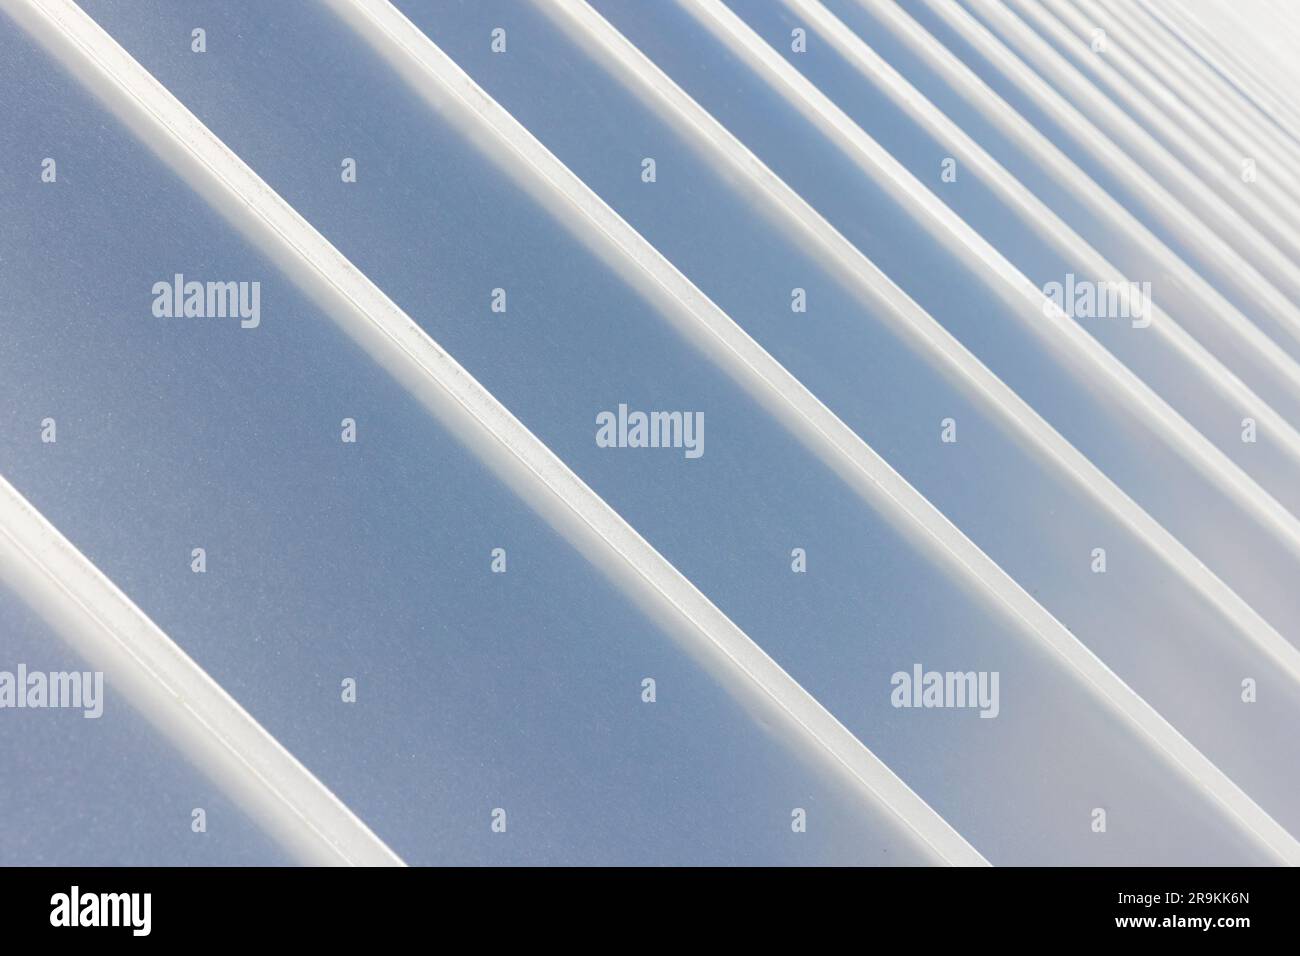 New roof made of stainless steel plates, abstract architecture background photo Stock Photo